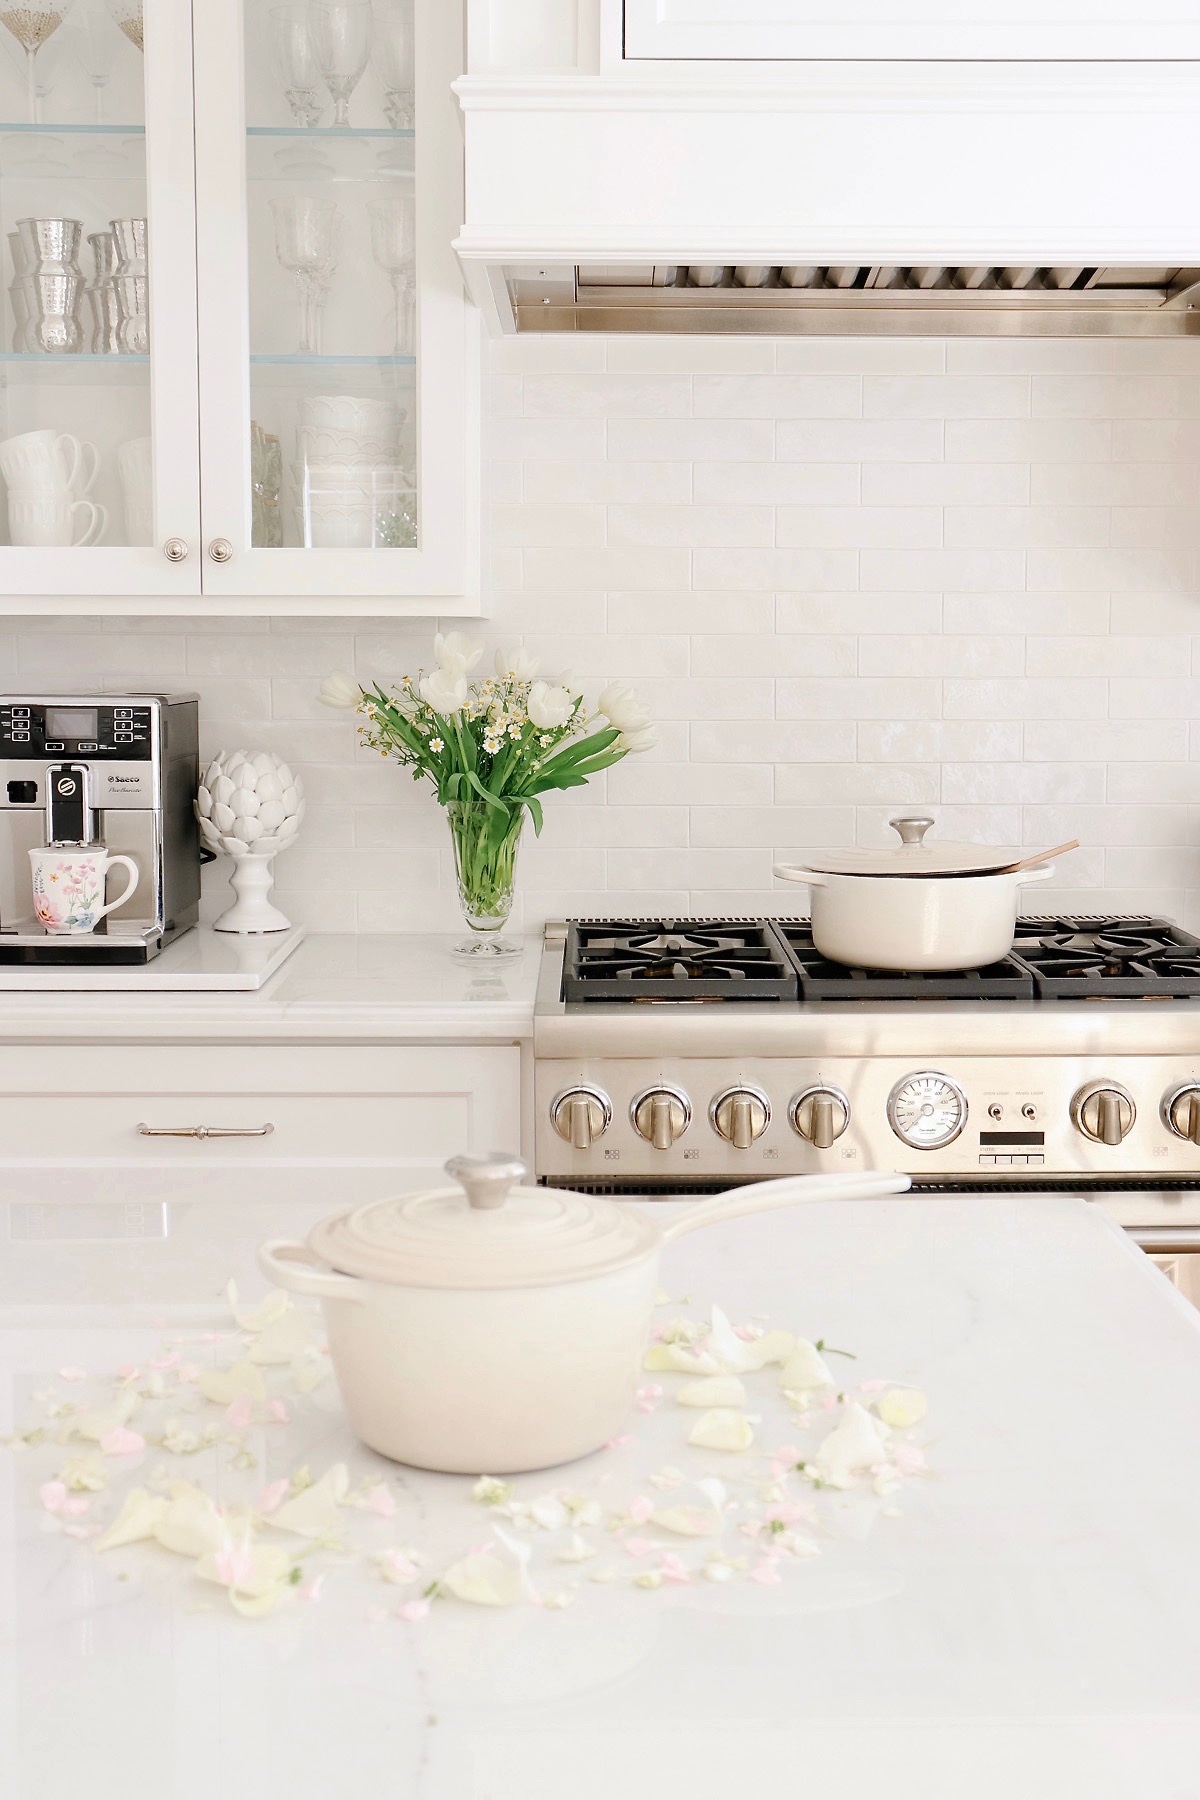 Finding Calm in the Kitchen with New Cookware | Le Creuset's New Calm Collection 2019 - Kristy Wicks